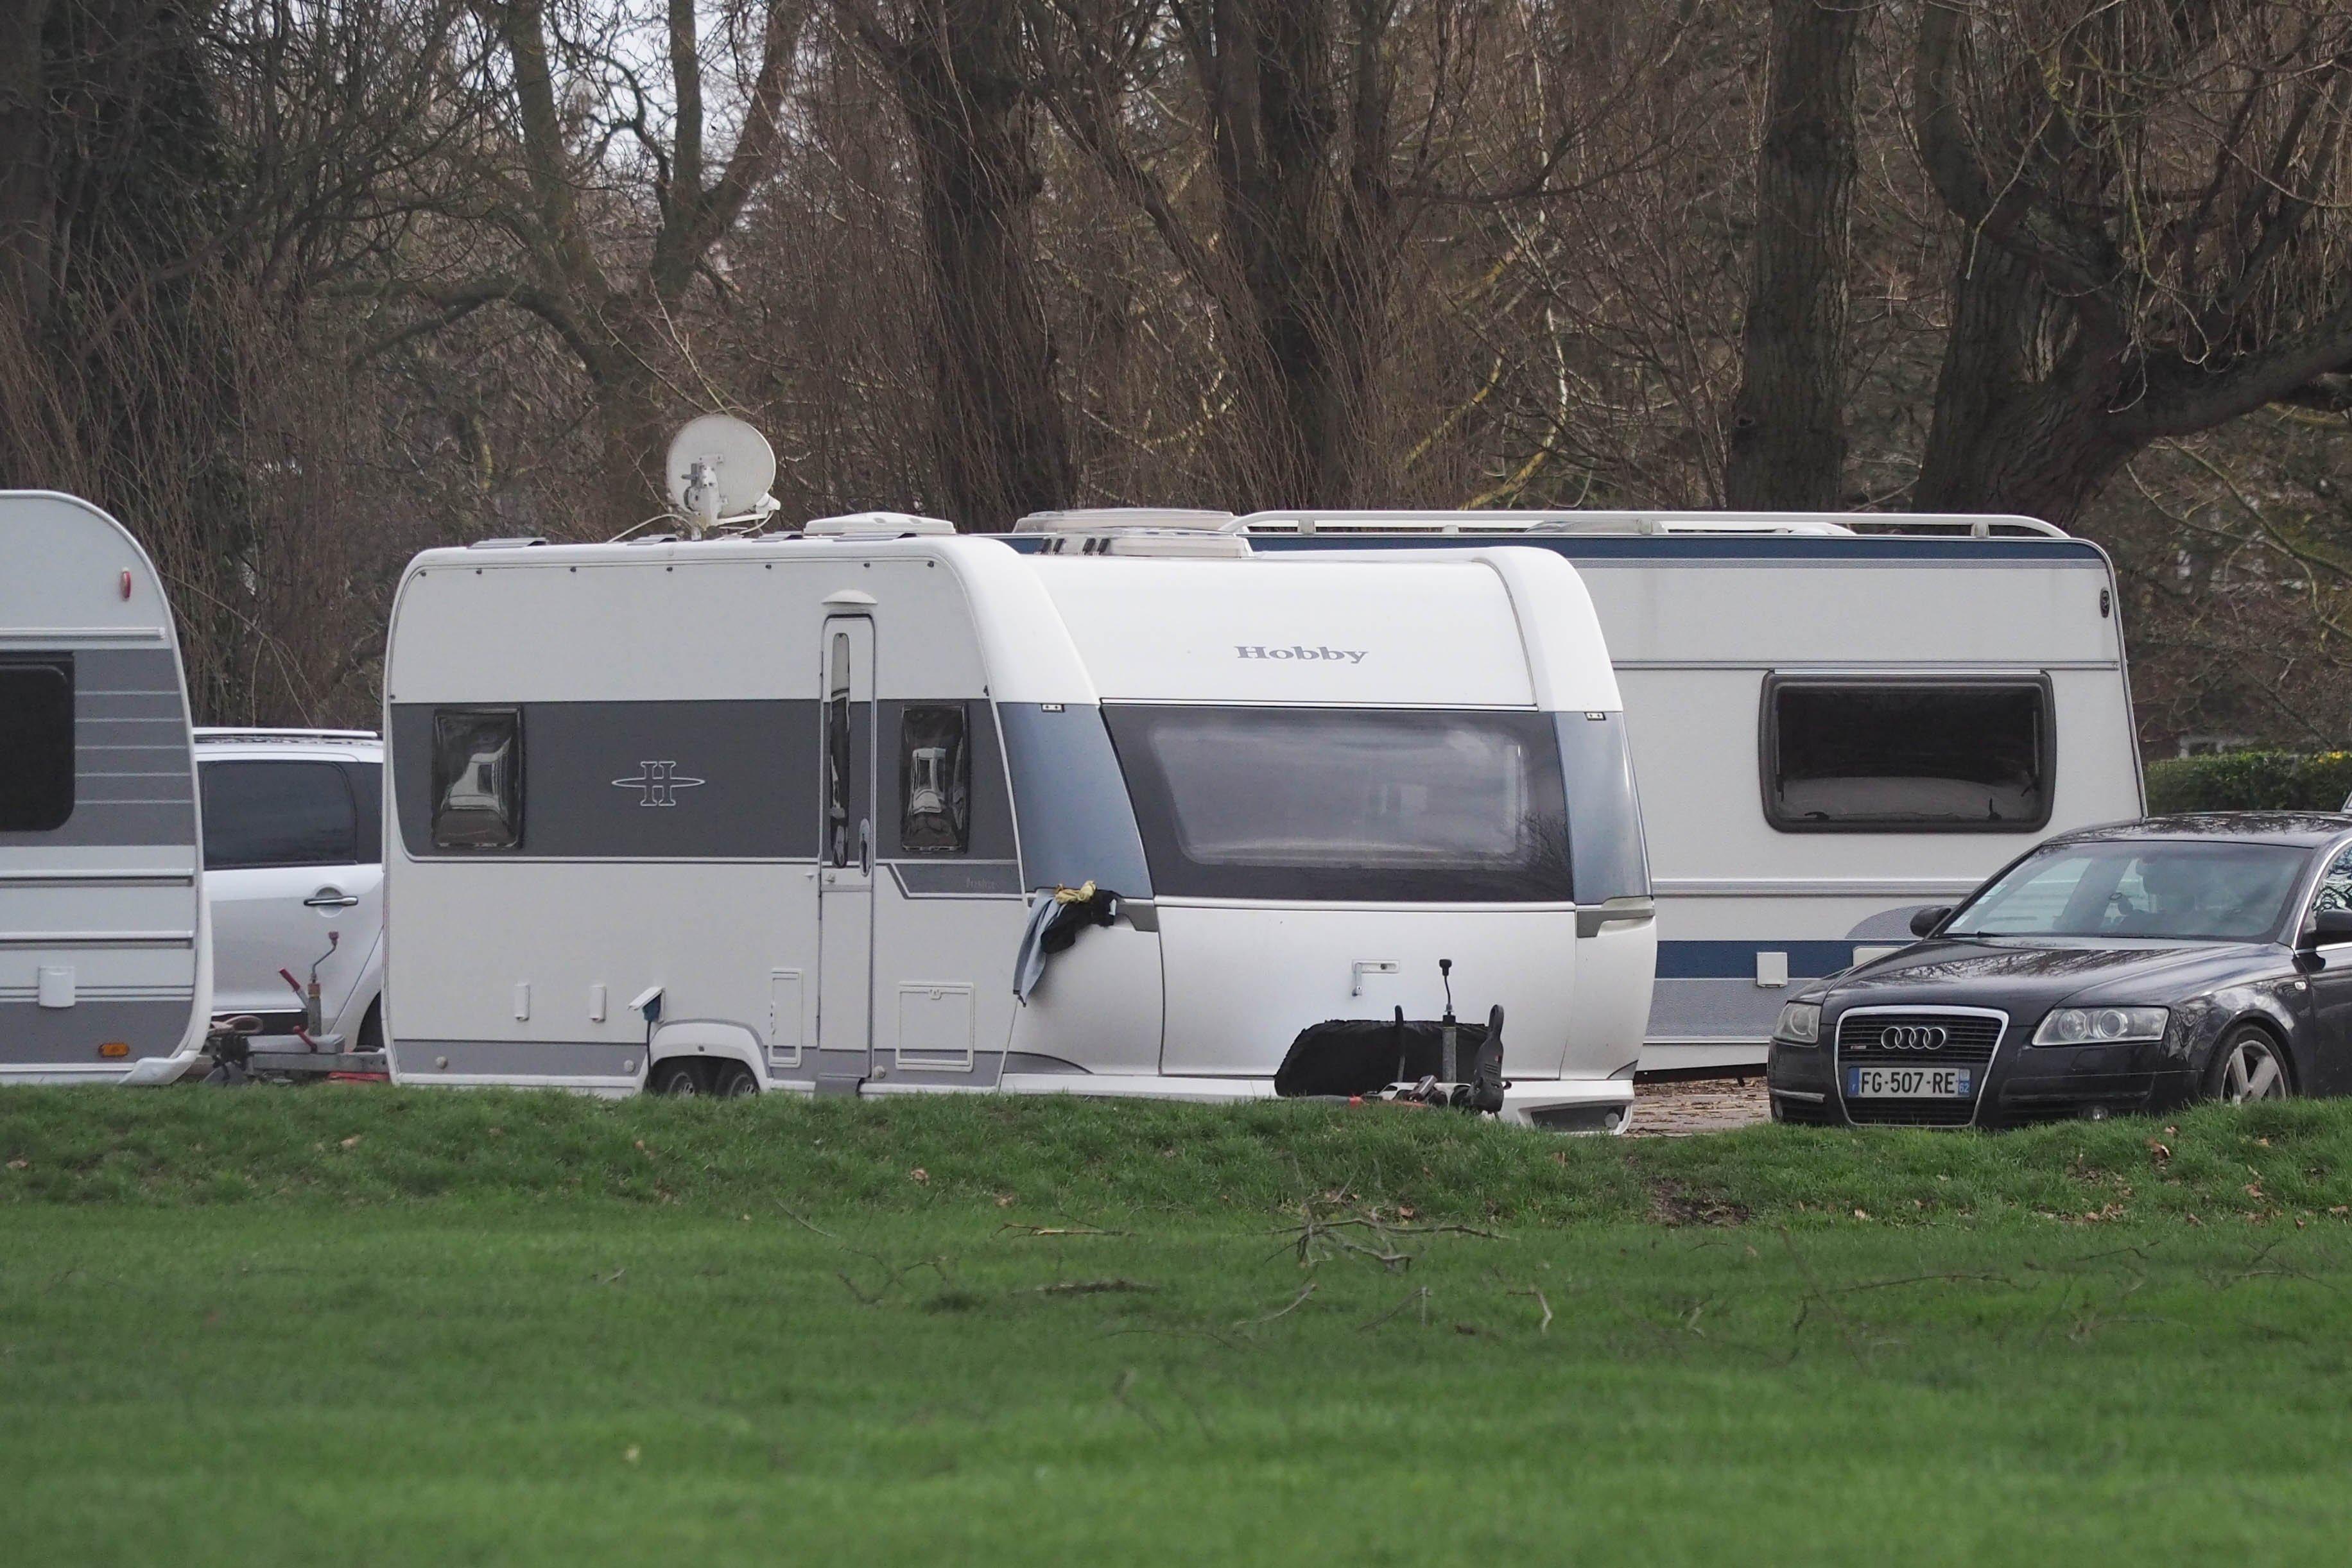 Travellers set up camp in King George V playing fields car park | The News